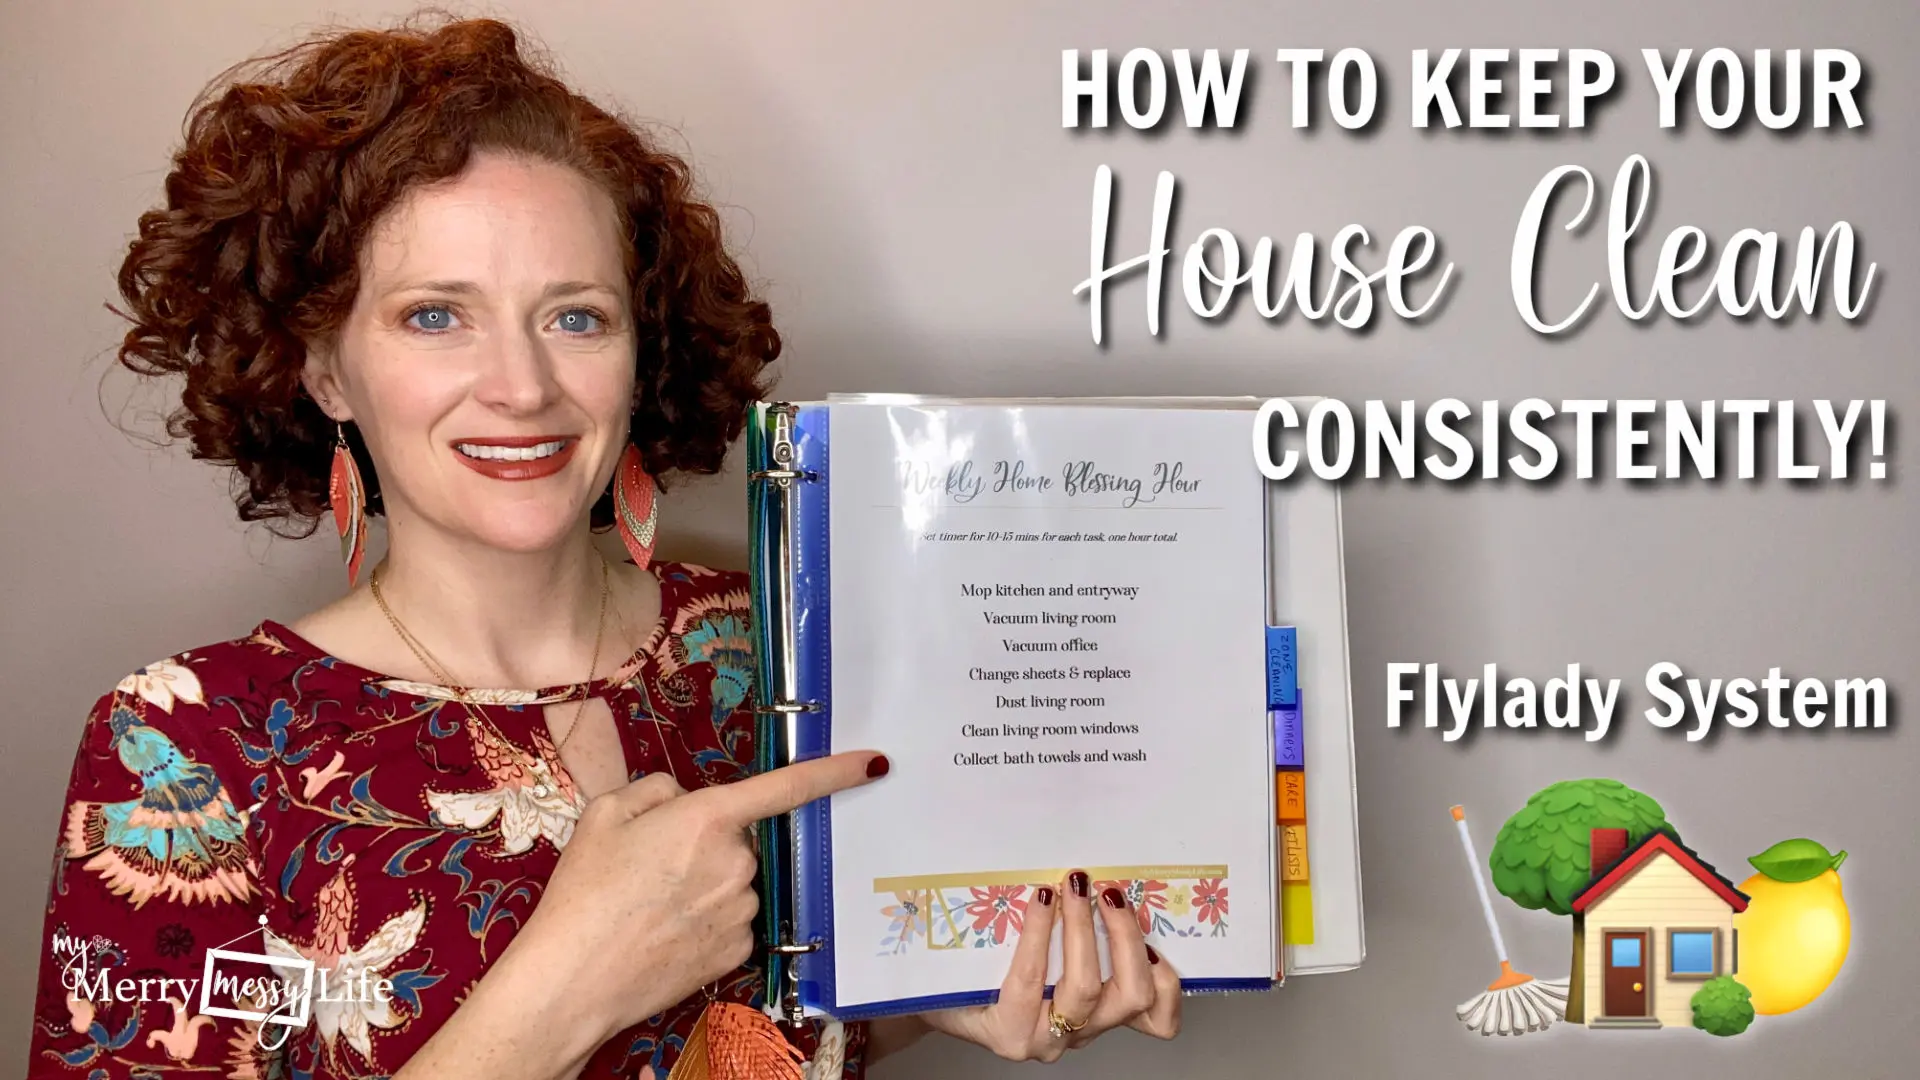 How to Keep Your House Clean Consistently with the Weekly Home Blessing Hour from the Flylady System